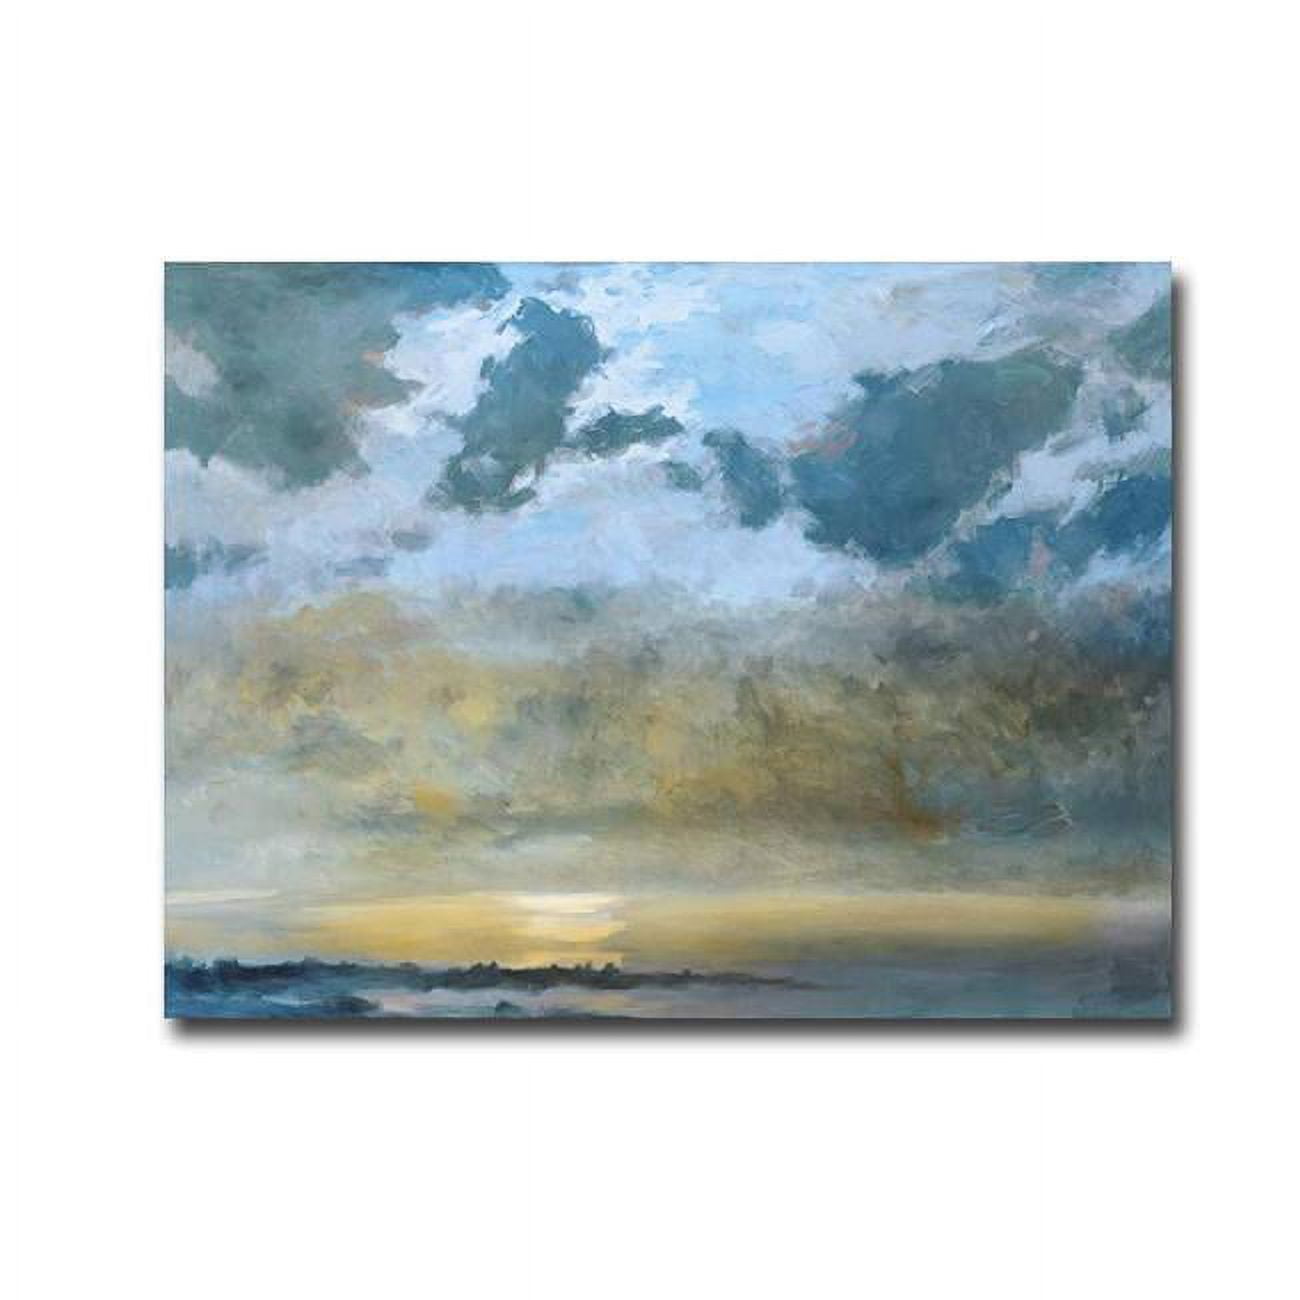 121675eg Evening Descends By Douglas Edwards Premium Gallery-wrapped Canvas Giclee Art - 12 X 16 In.